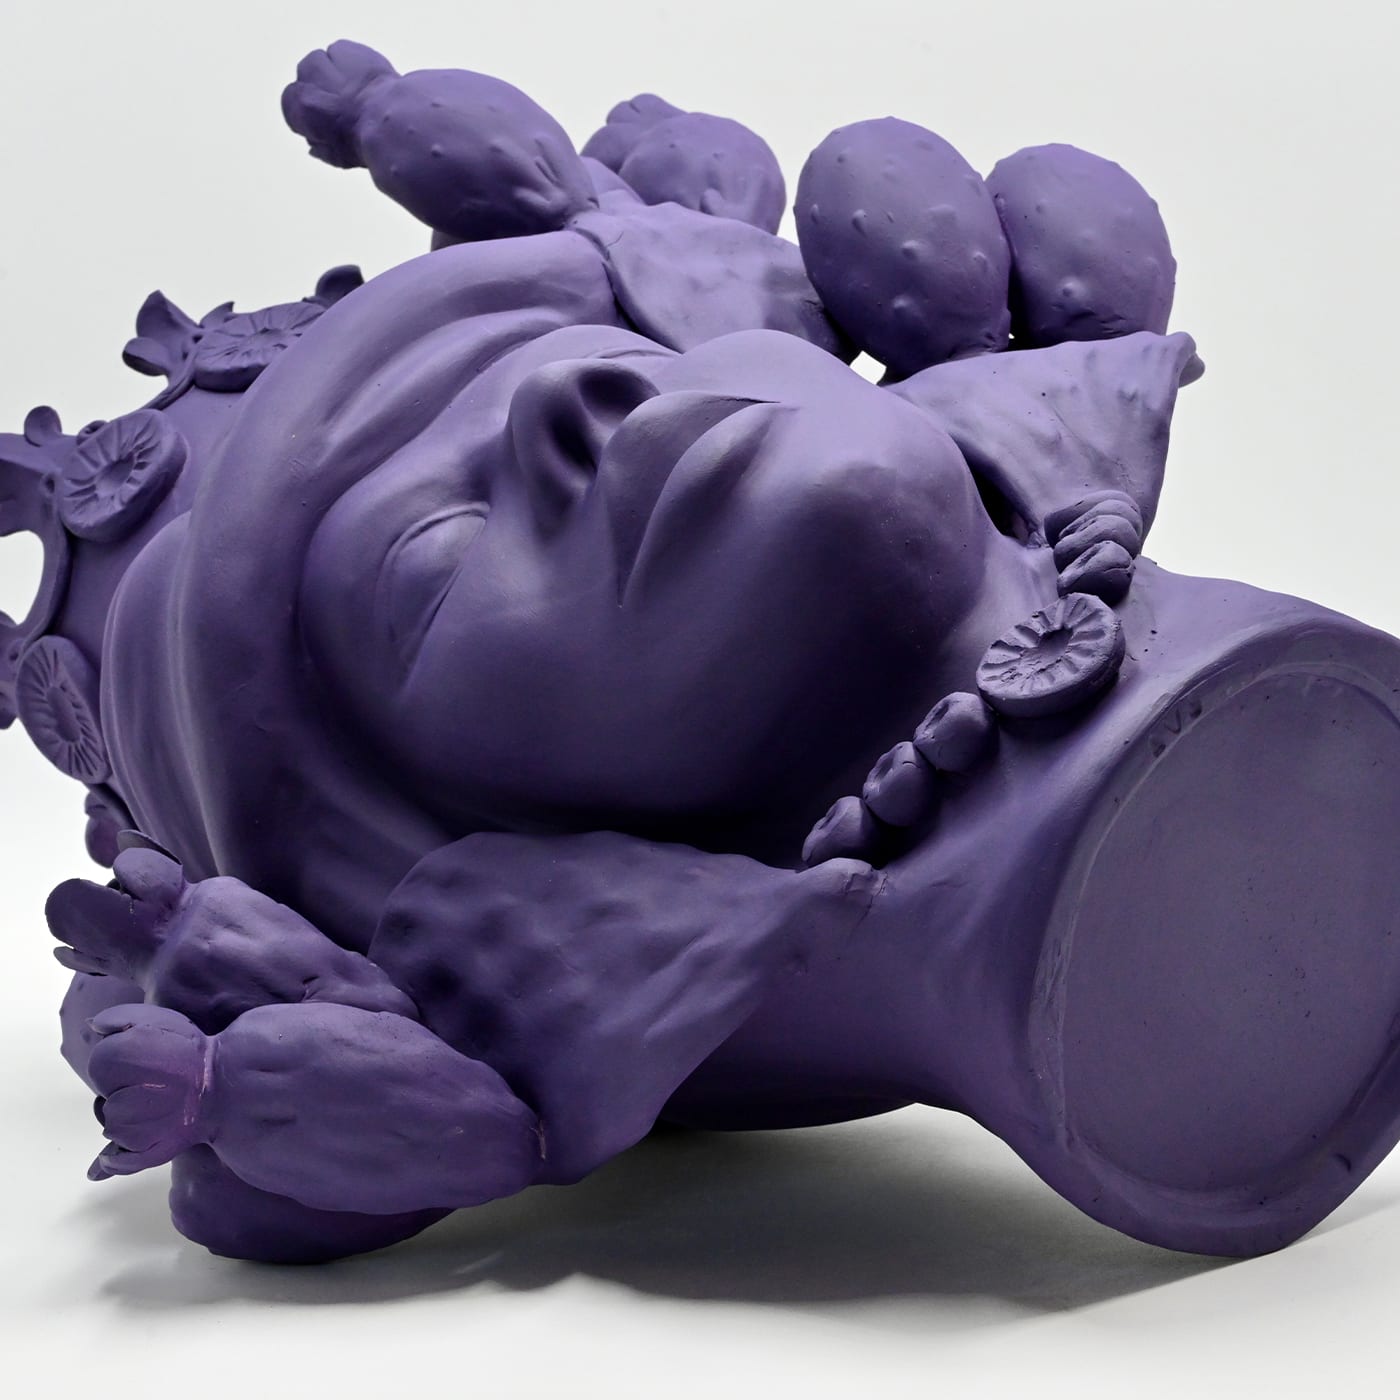 Violet Handcrafted Moor's Head Sculpture from Italy